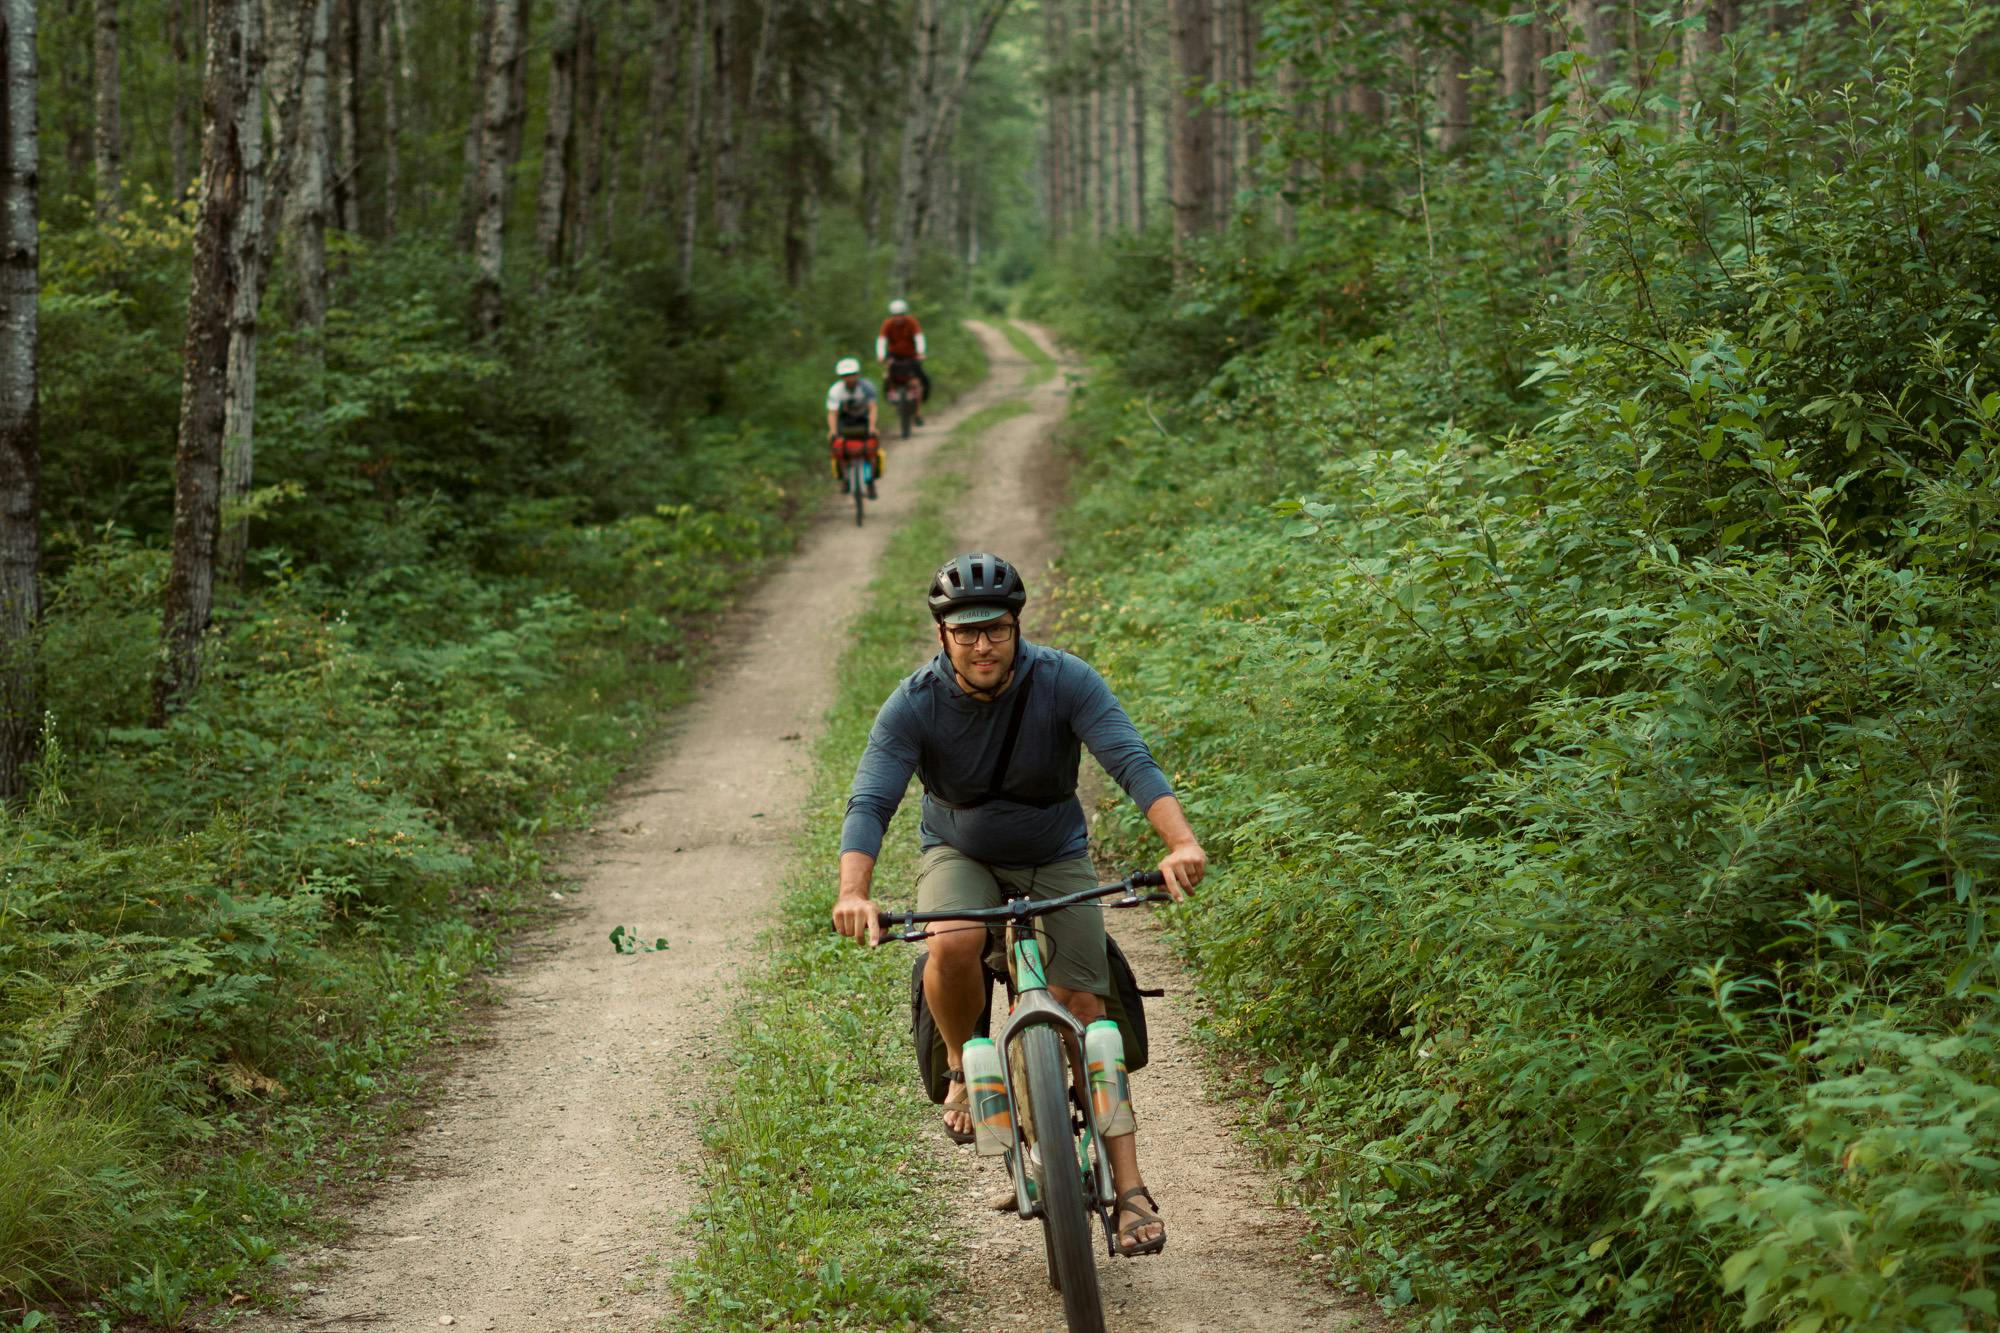 Riding the Itasca Bikepacking route, getting closer.